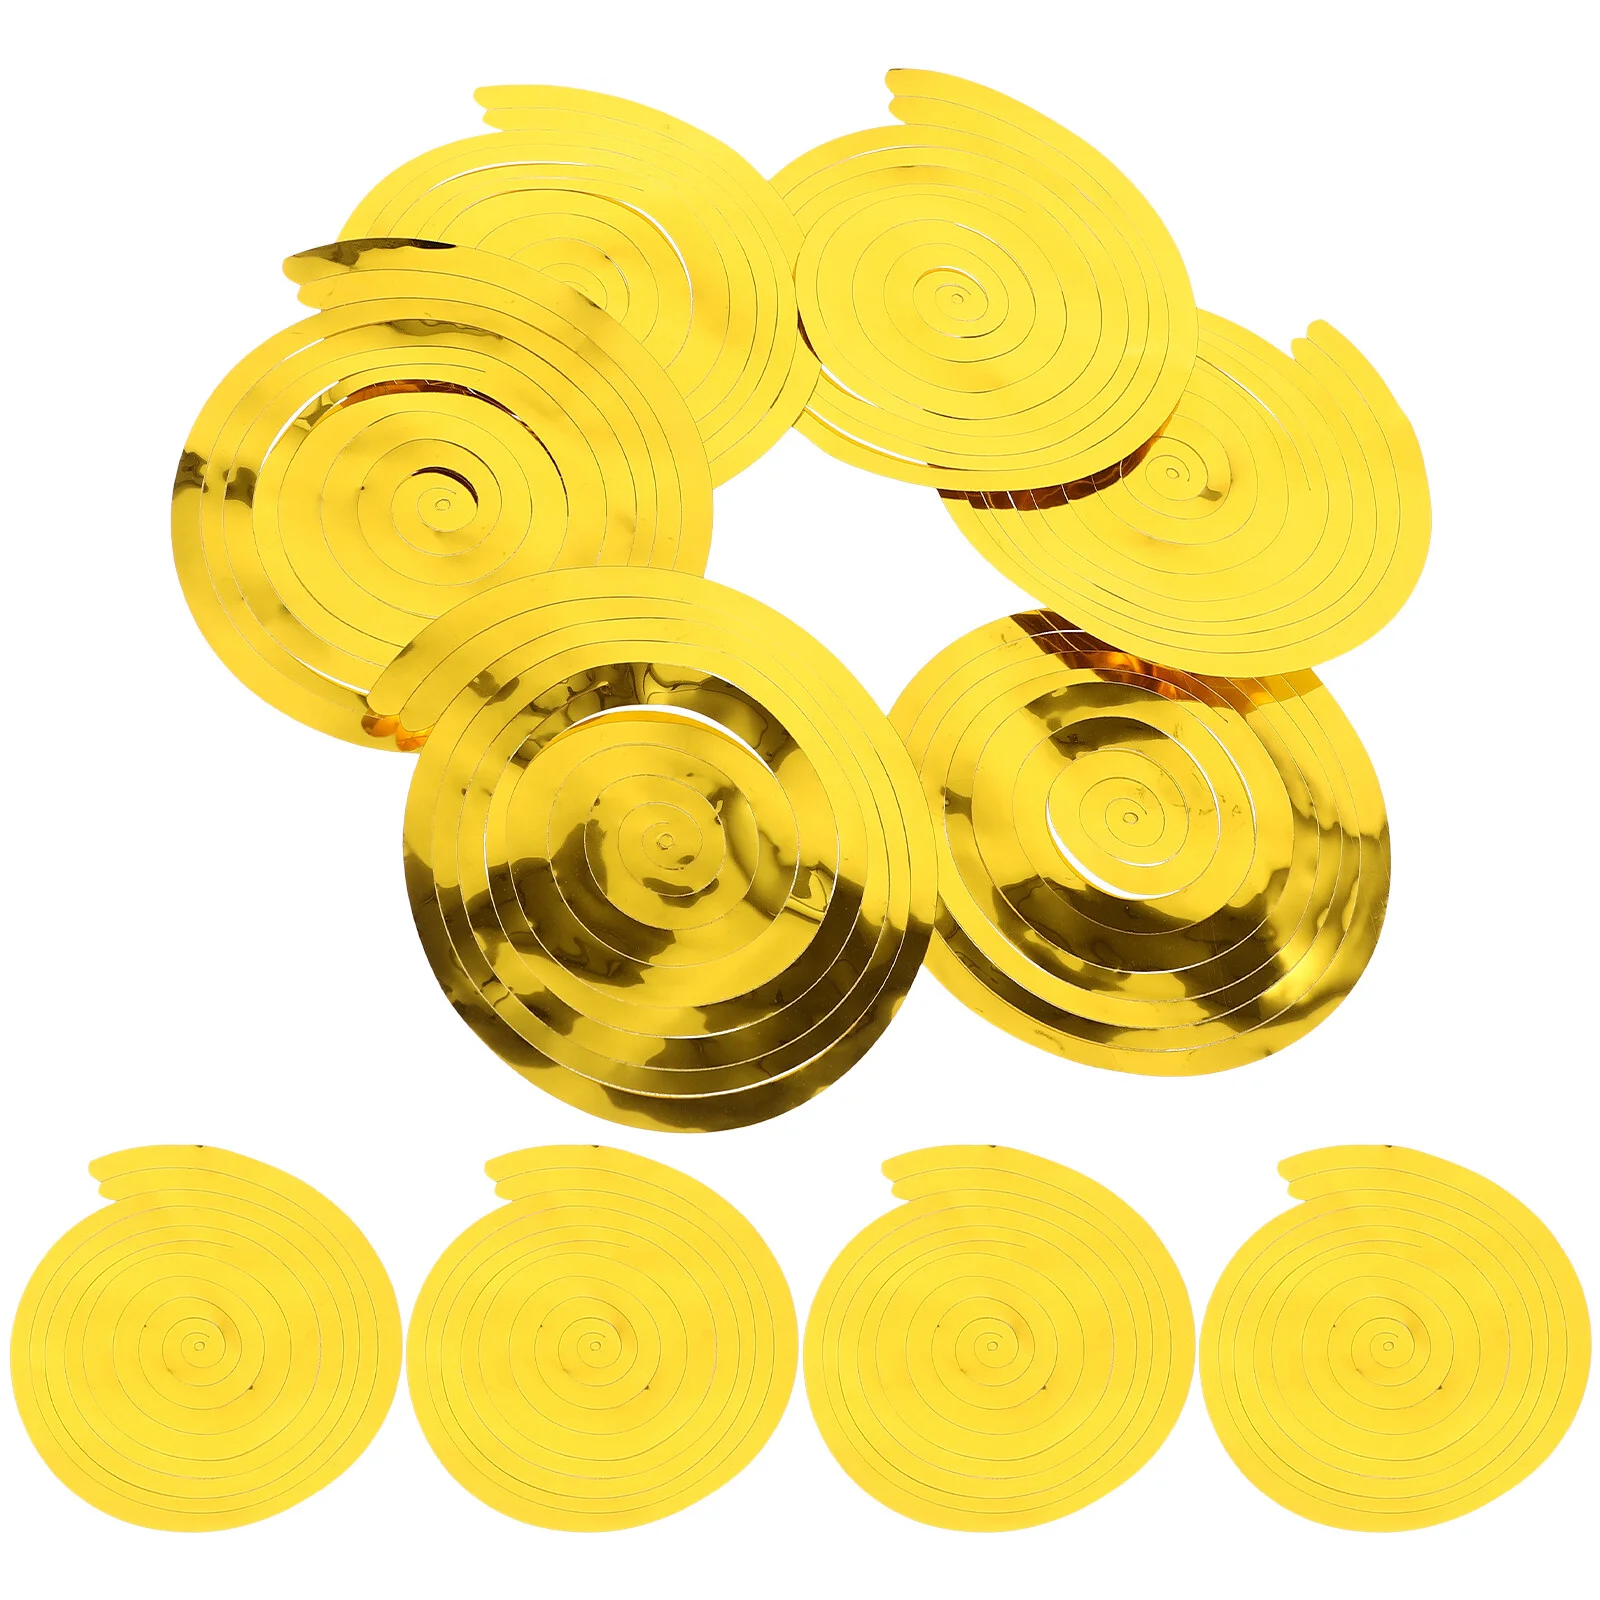 

30 Pcs Set Gold Decor Hanging Swirl Party Supplies Decorations Birthday Gift Plastic Wedding Spiral Garlands Baby New Year